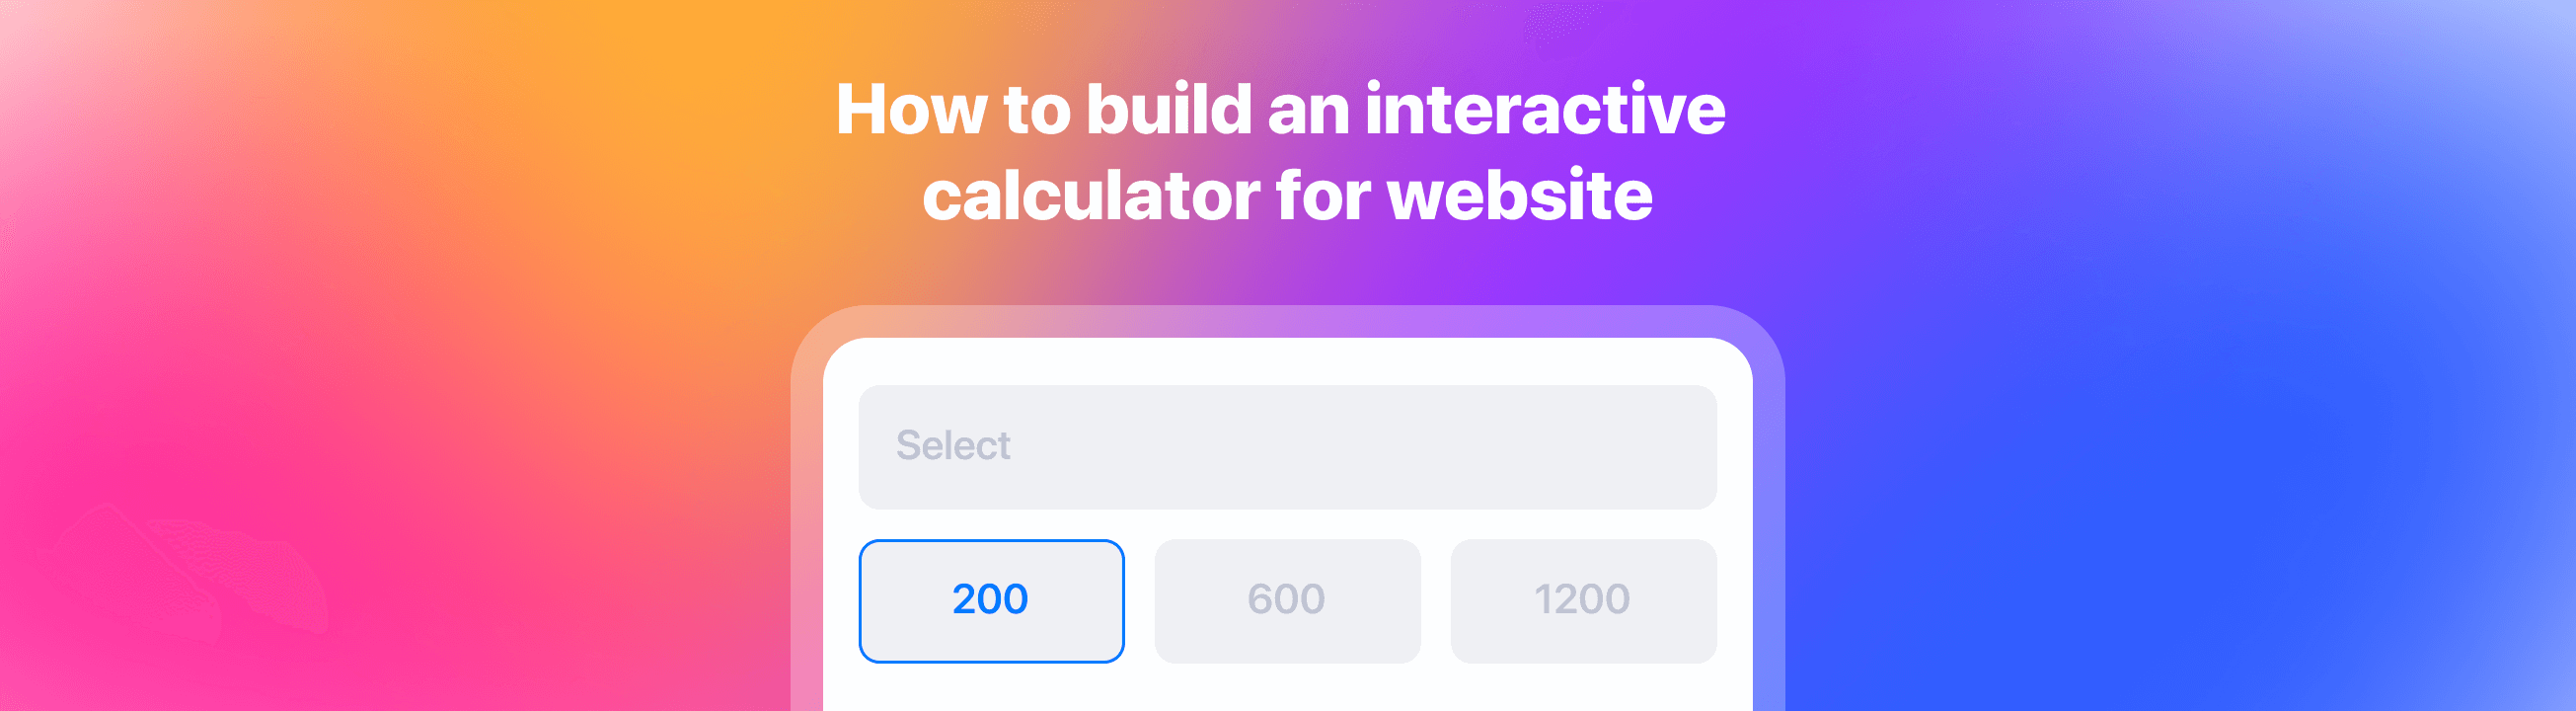 How To Build An Interactive Calculator For Website?